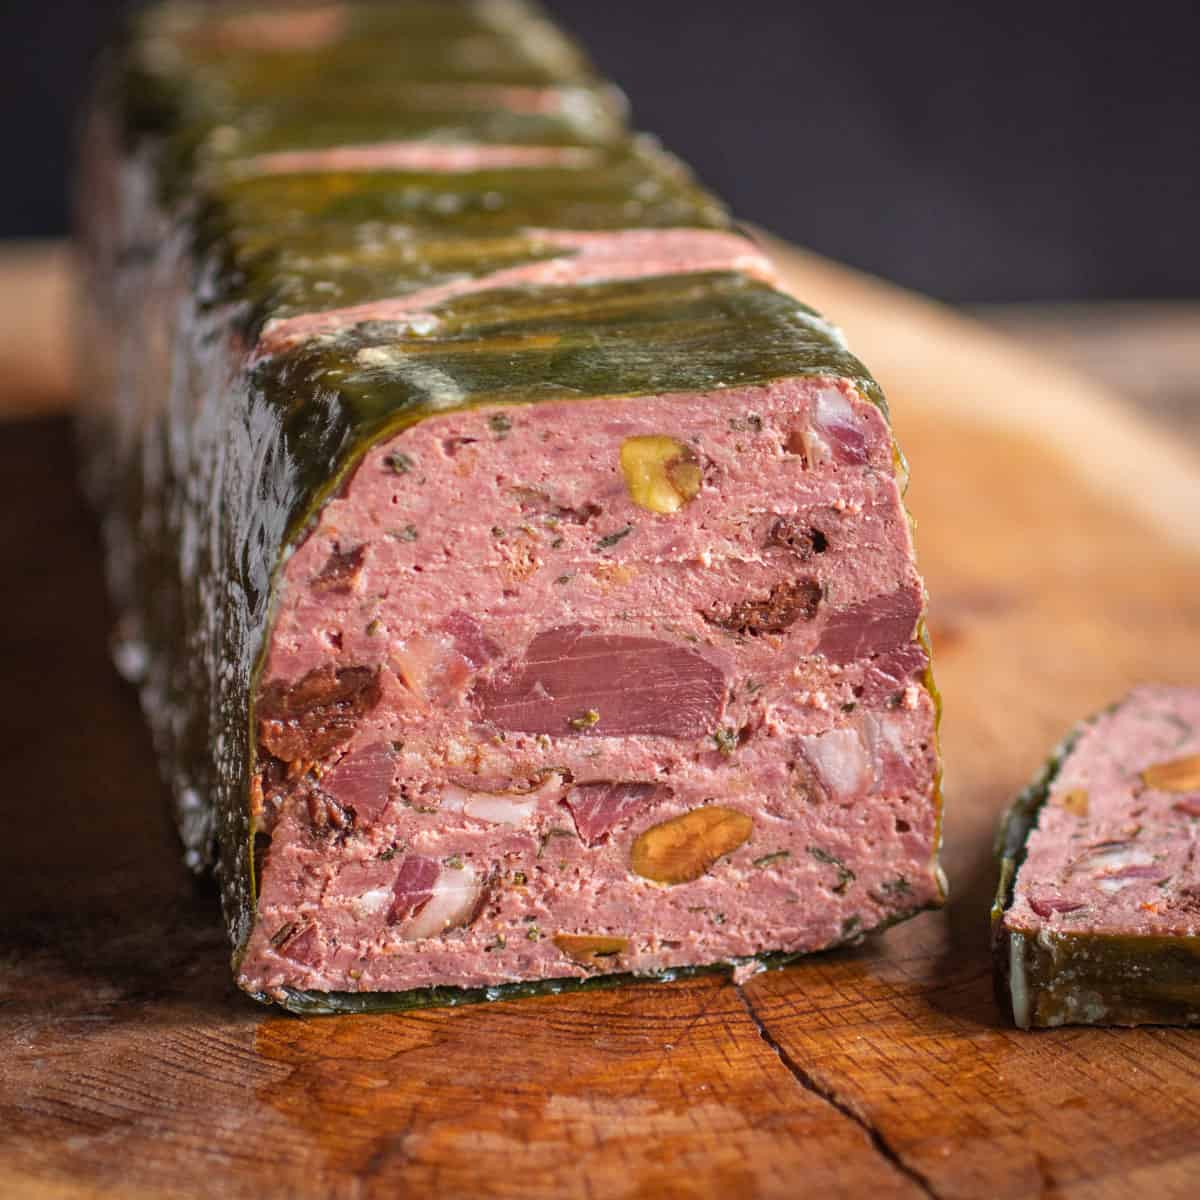 Spring liver terrine with ramp leaves